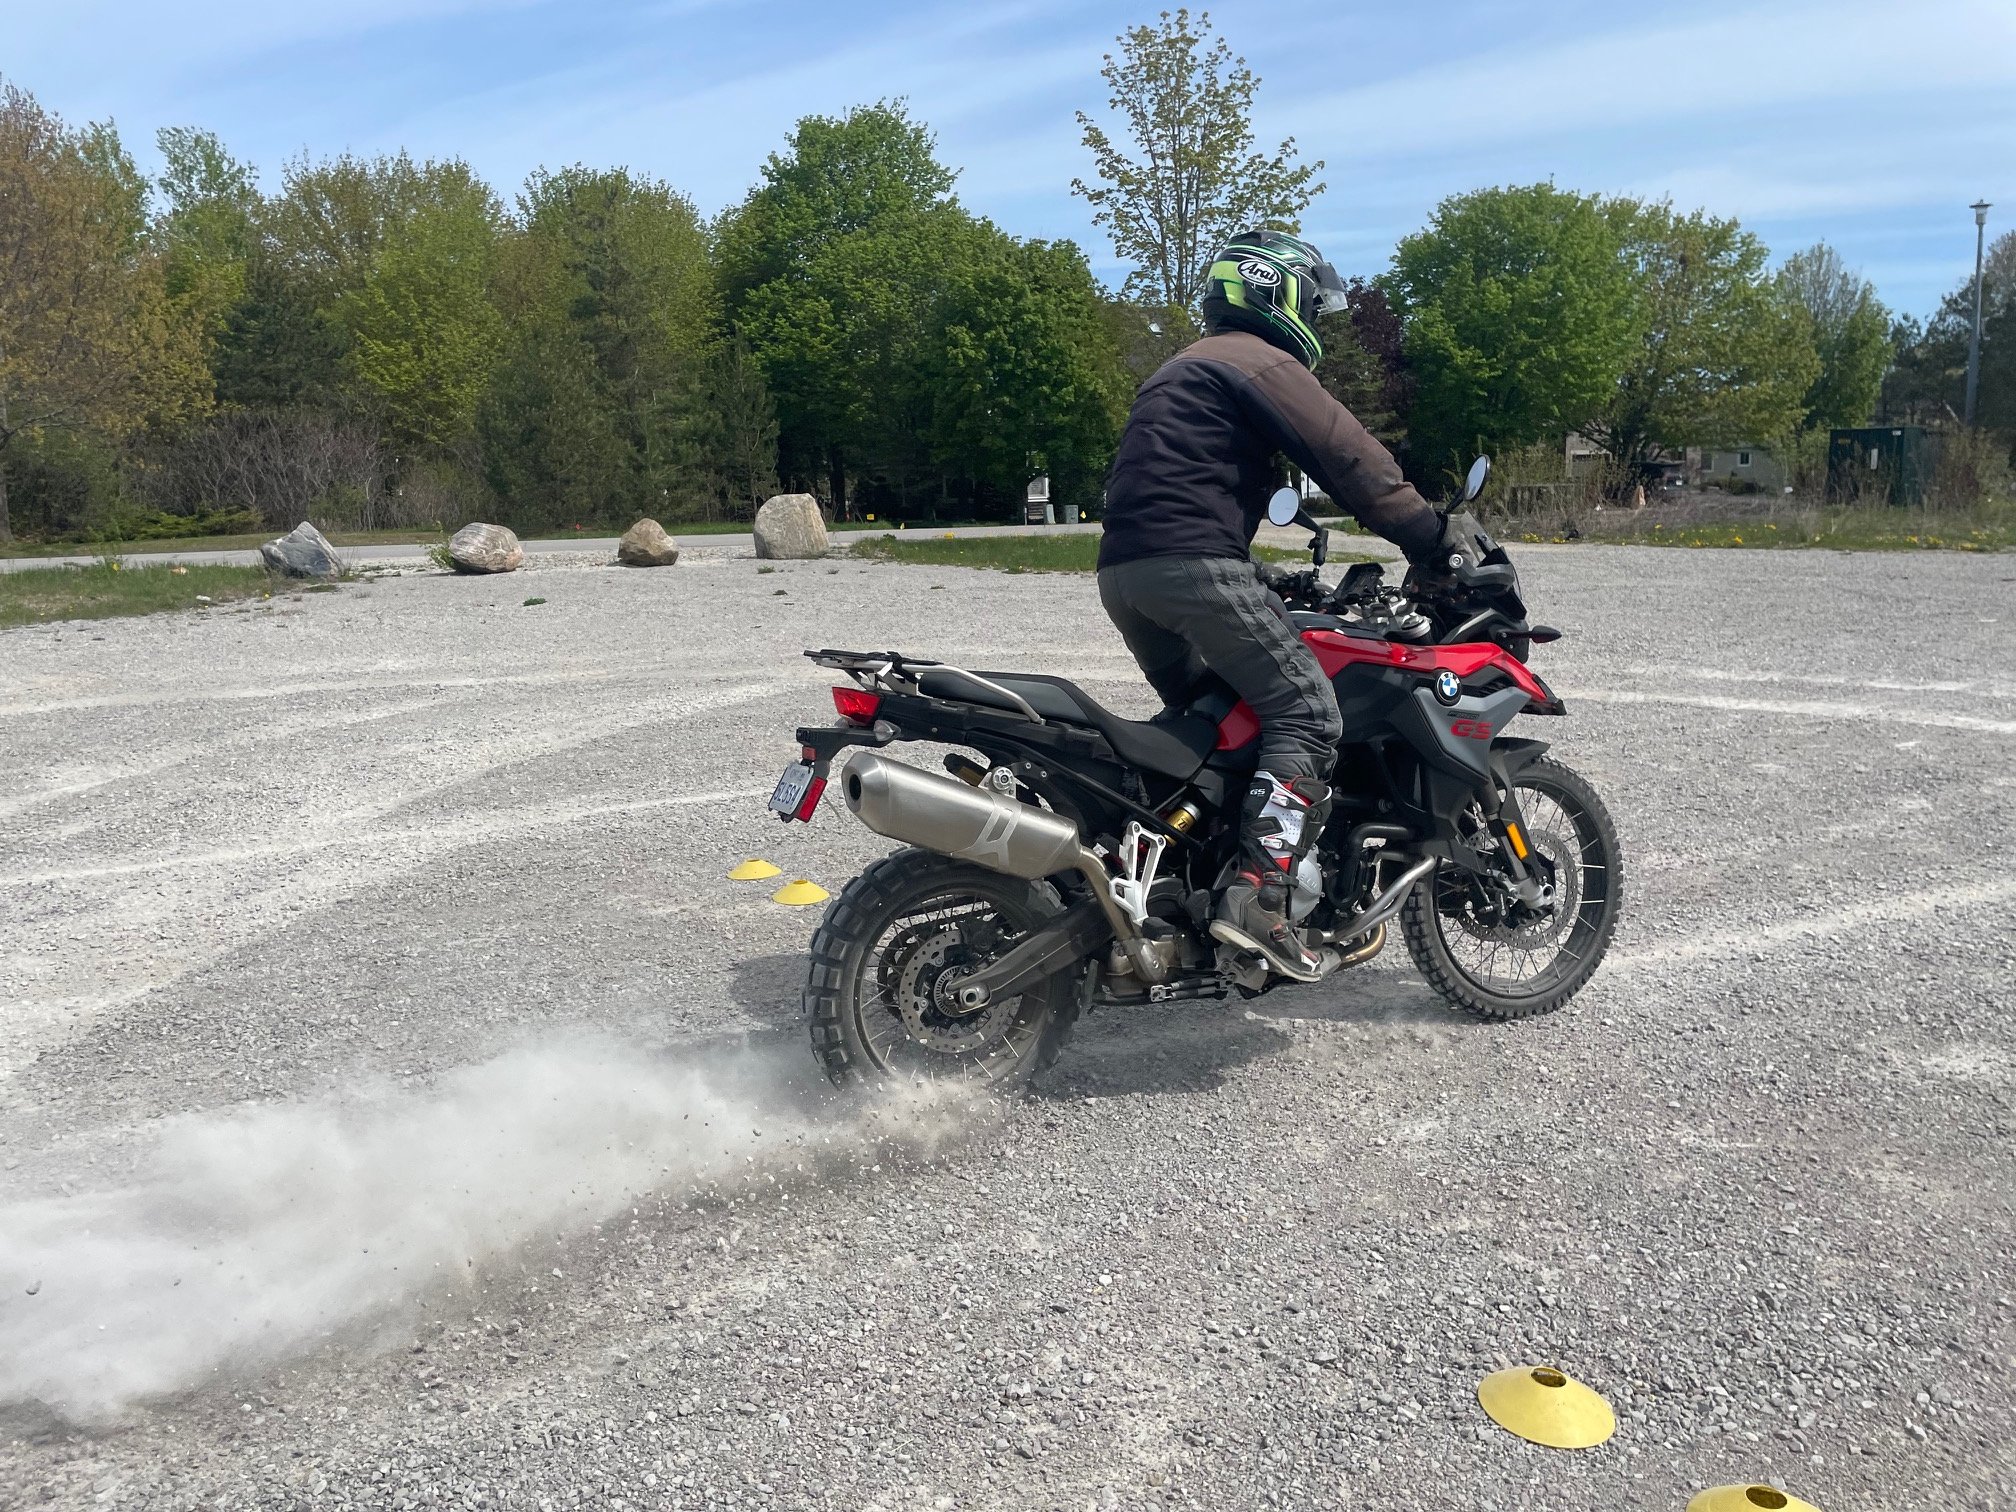  Motorcycle spinning rear tire in sand.   